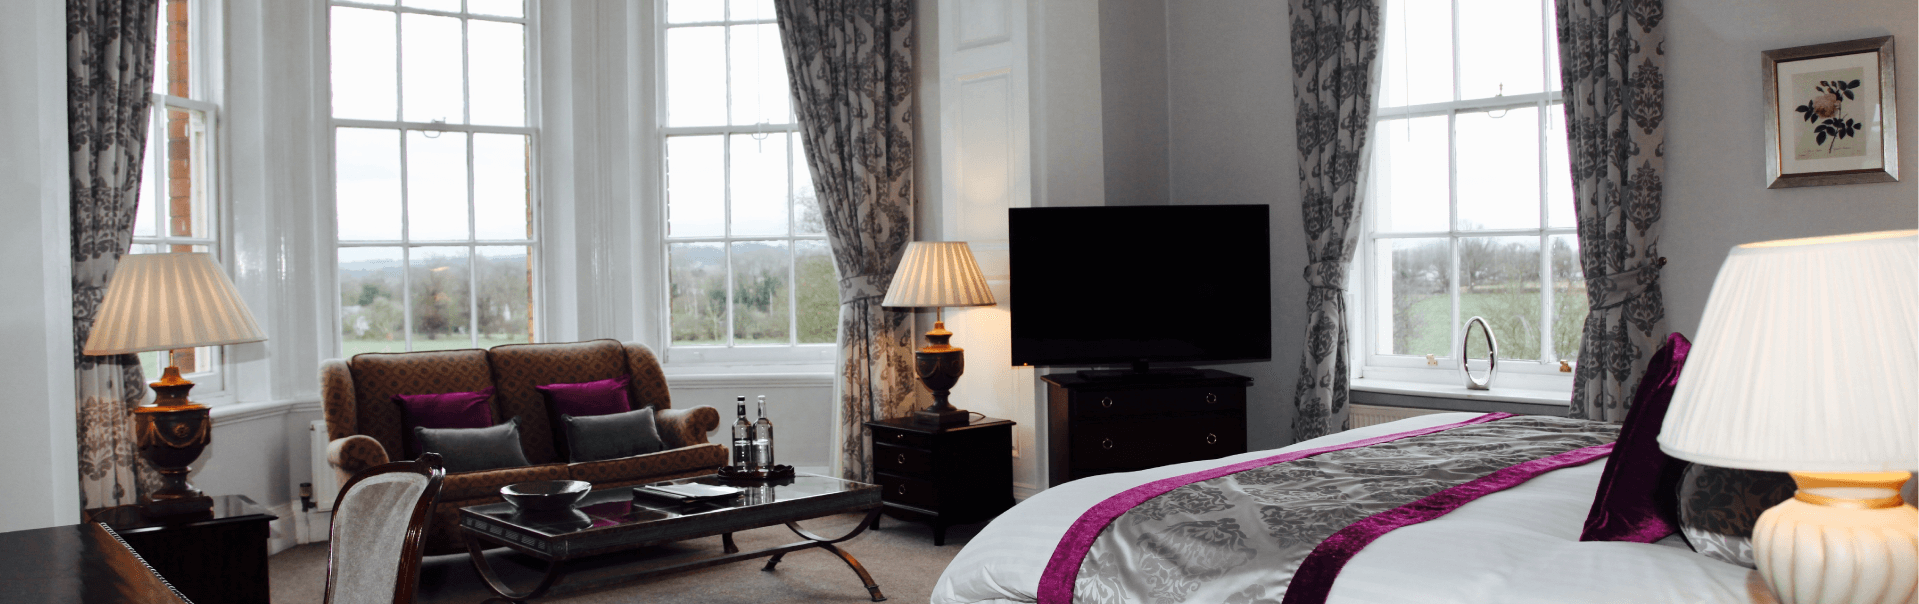 Country House Hotel Staffordshire - Dovecliff Hall Hotel